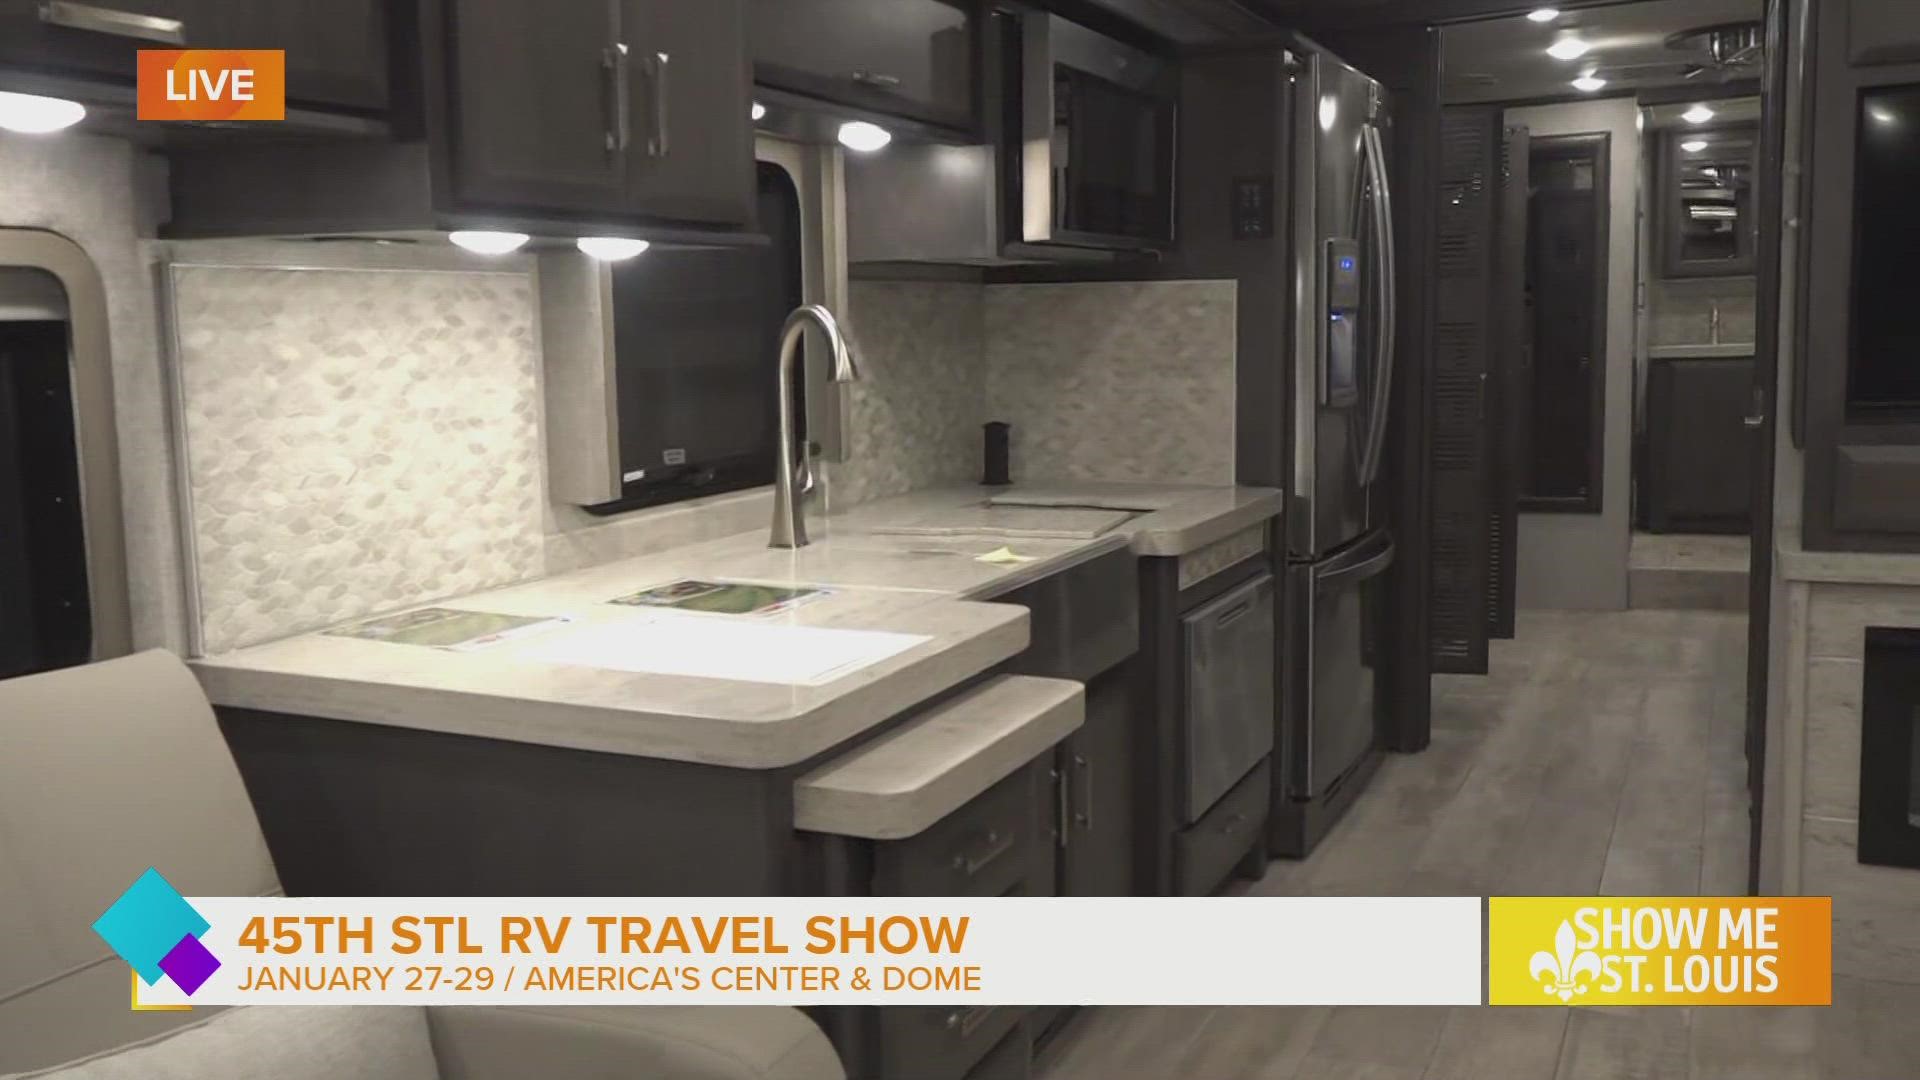 Over 300 RVs will be on display and for sale from eight of St. Louis’ Most trusted family-owned dealers.